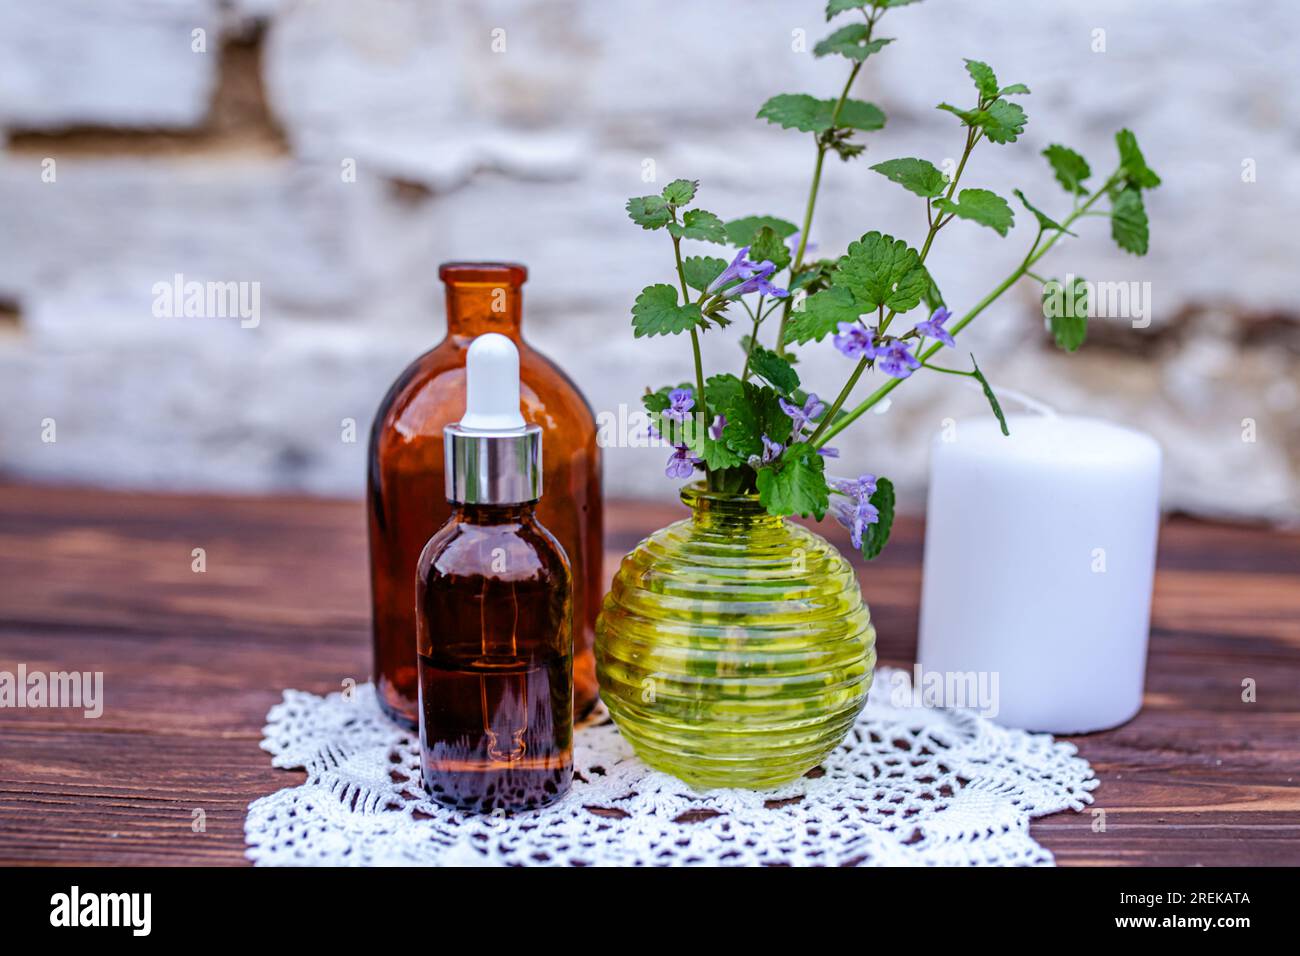 Glechoma hederacea, ground-ivy, gill-over-the-ground, creeping charlie, alehoof, tunhoof, catsfoot. Essential oil and tincture from a medicinal plant. Stock Photo